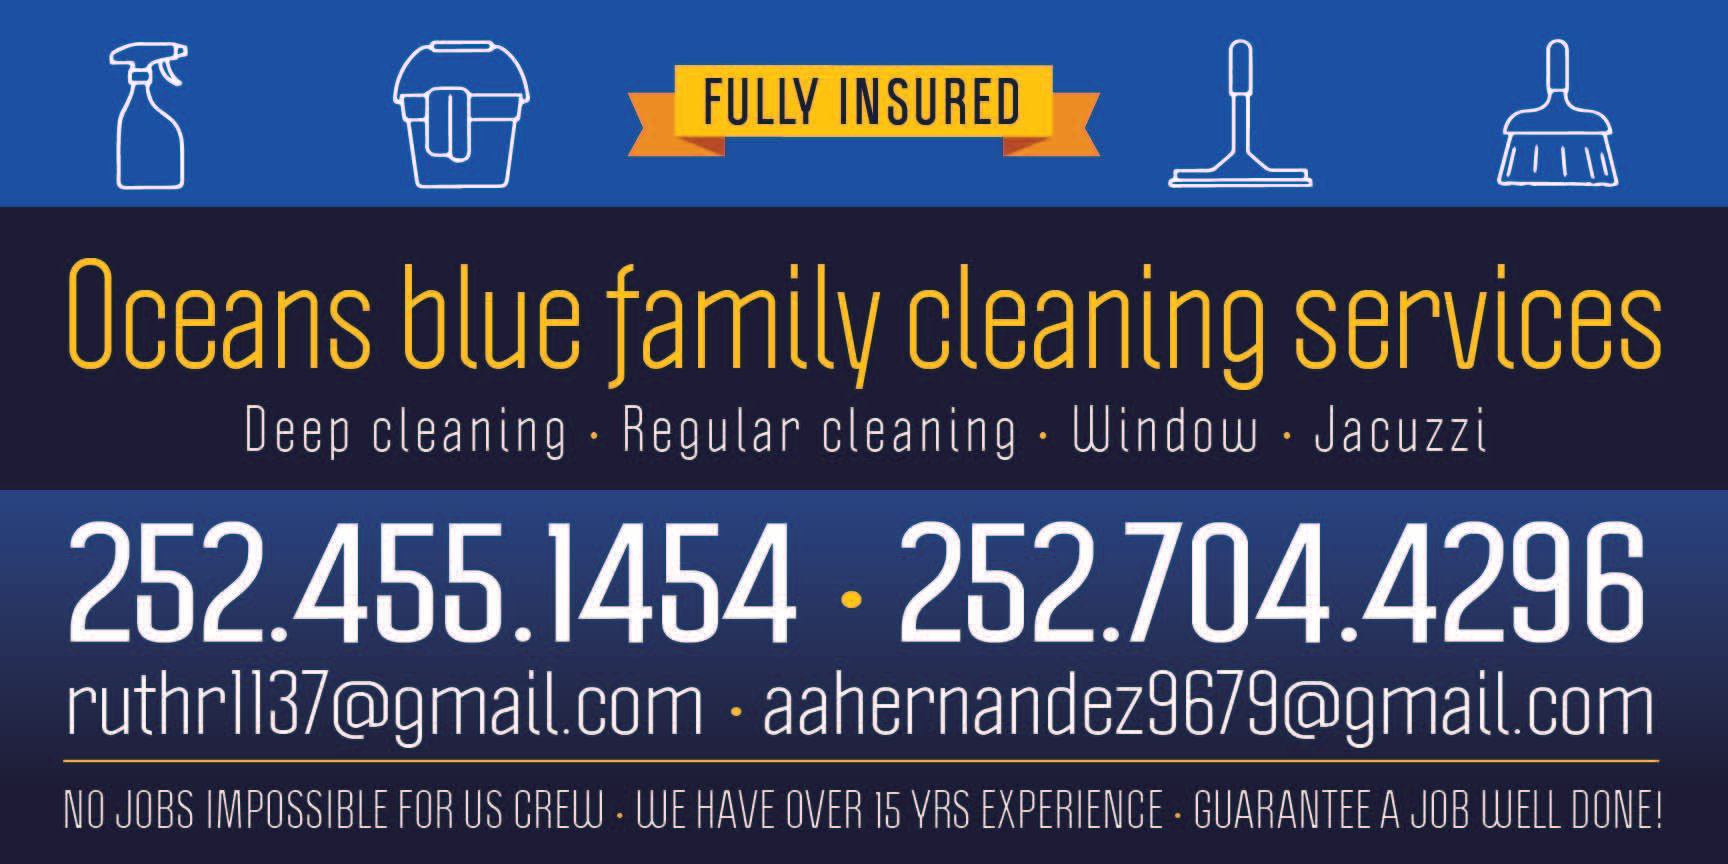 Oceans Blue Family Cleaning Services Logo